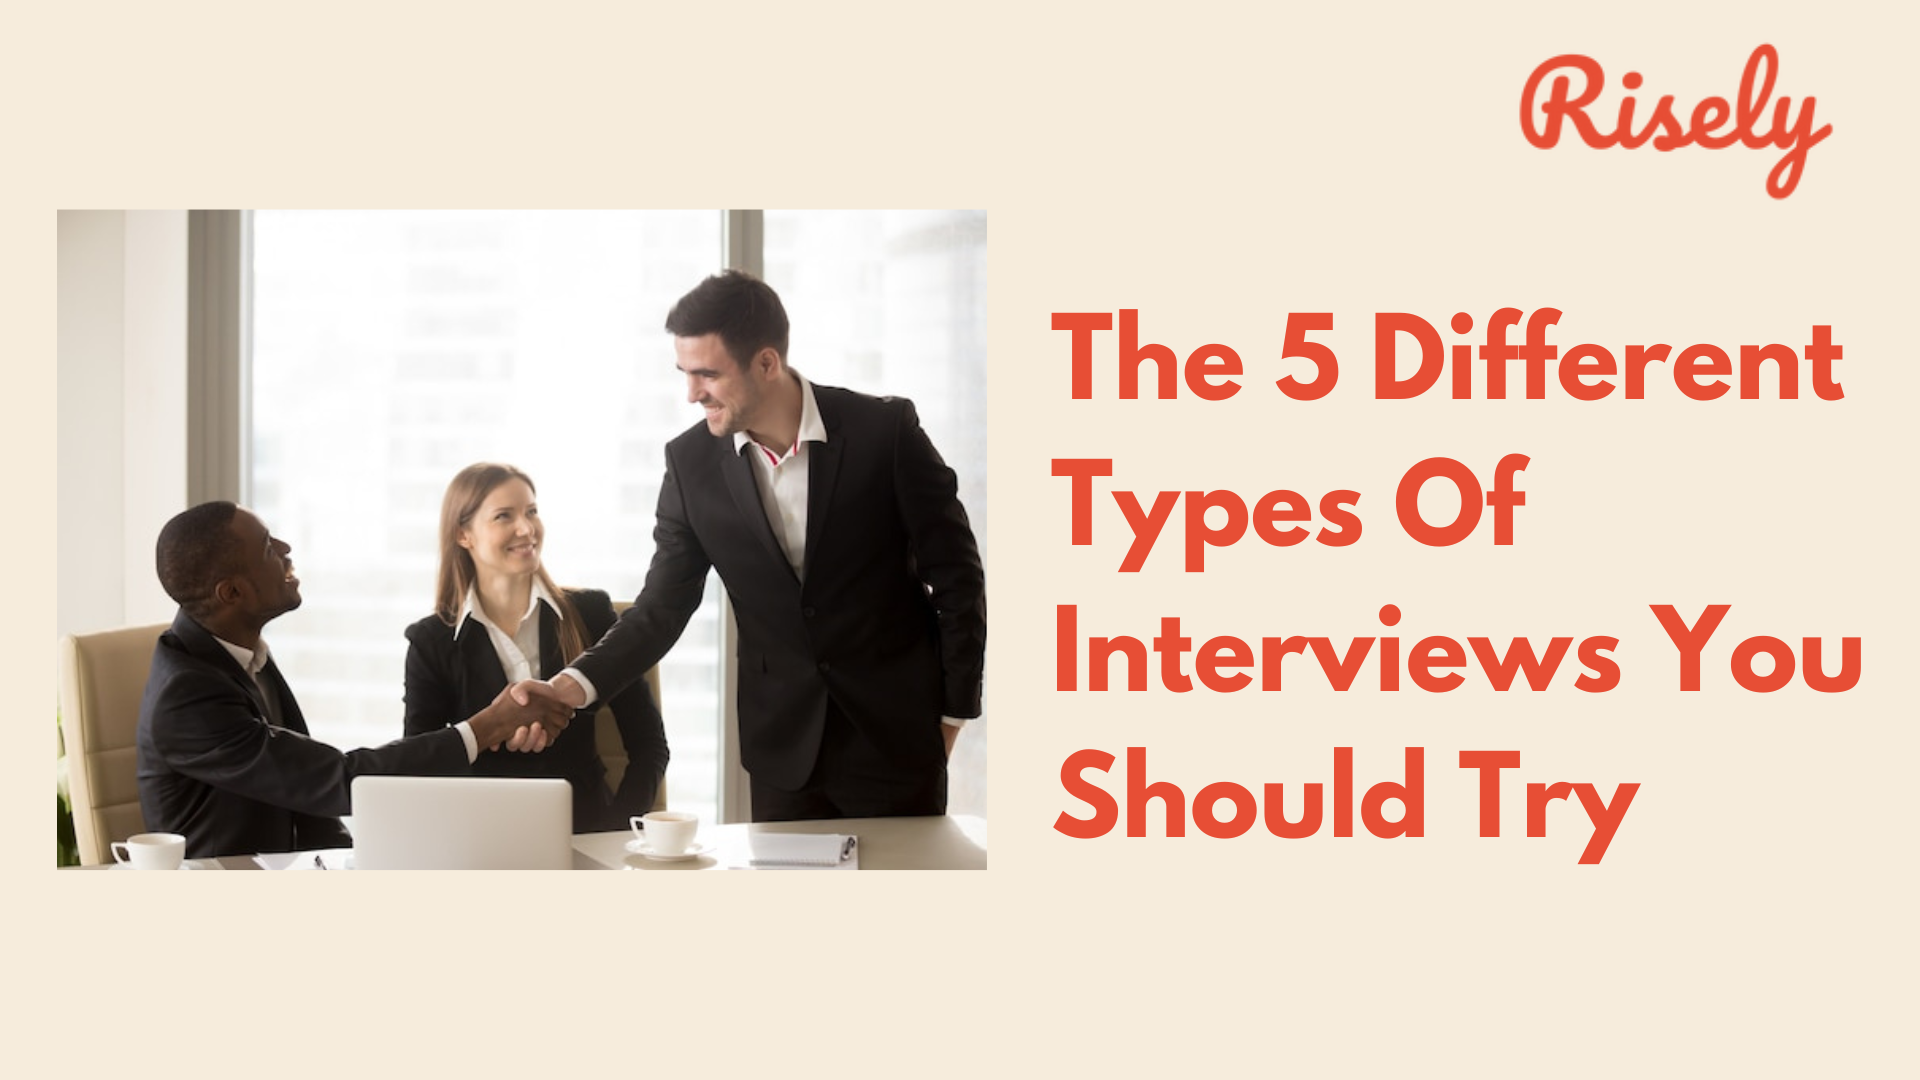 types of interviews